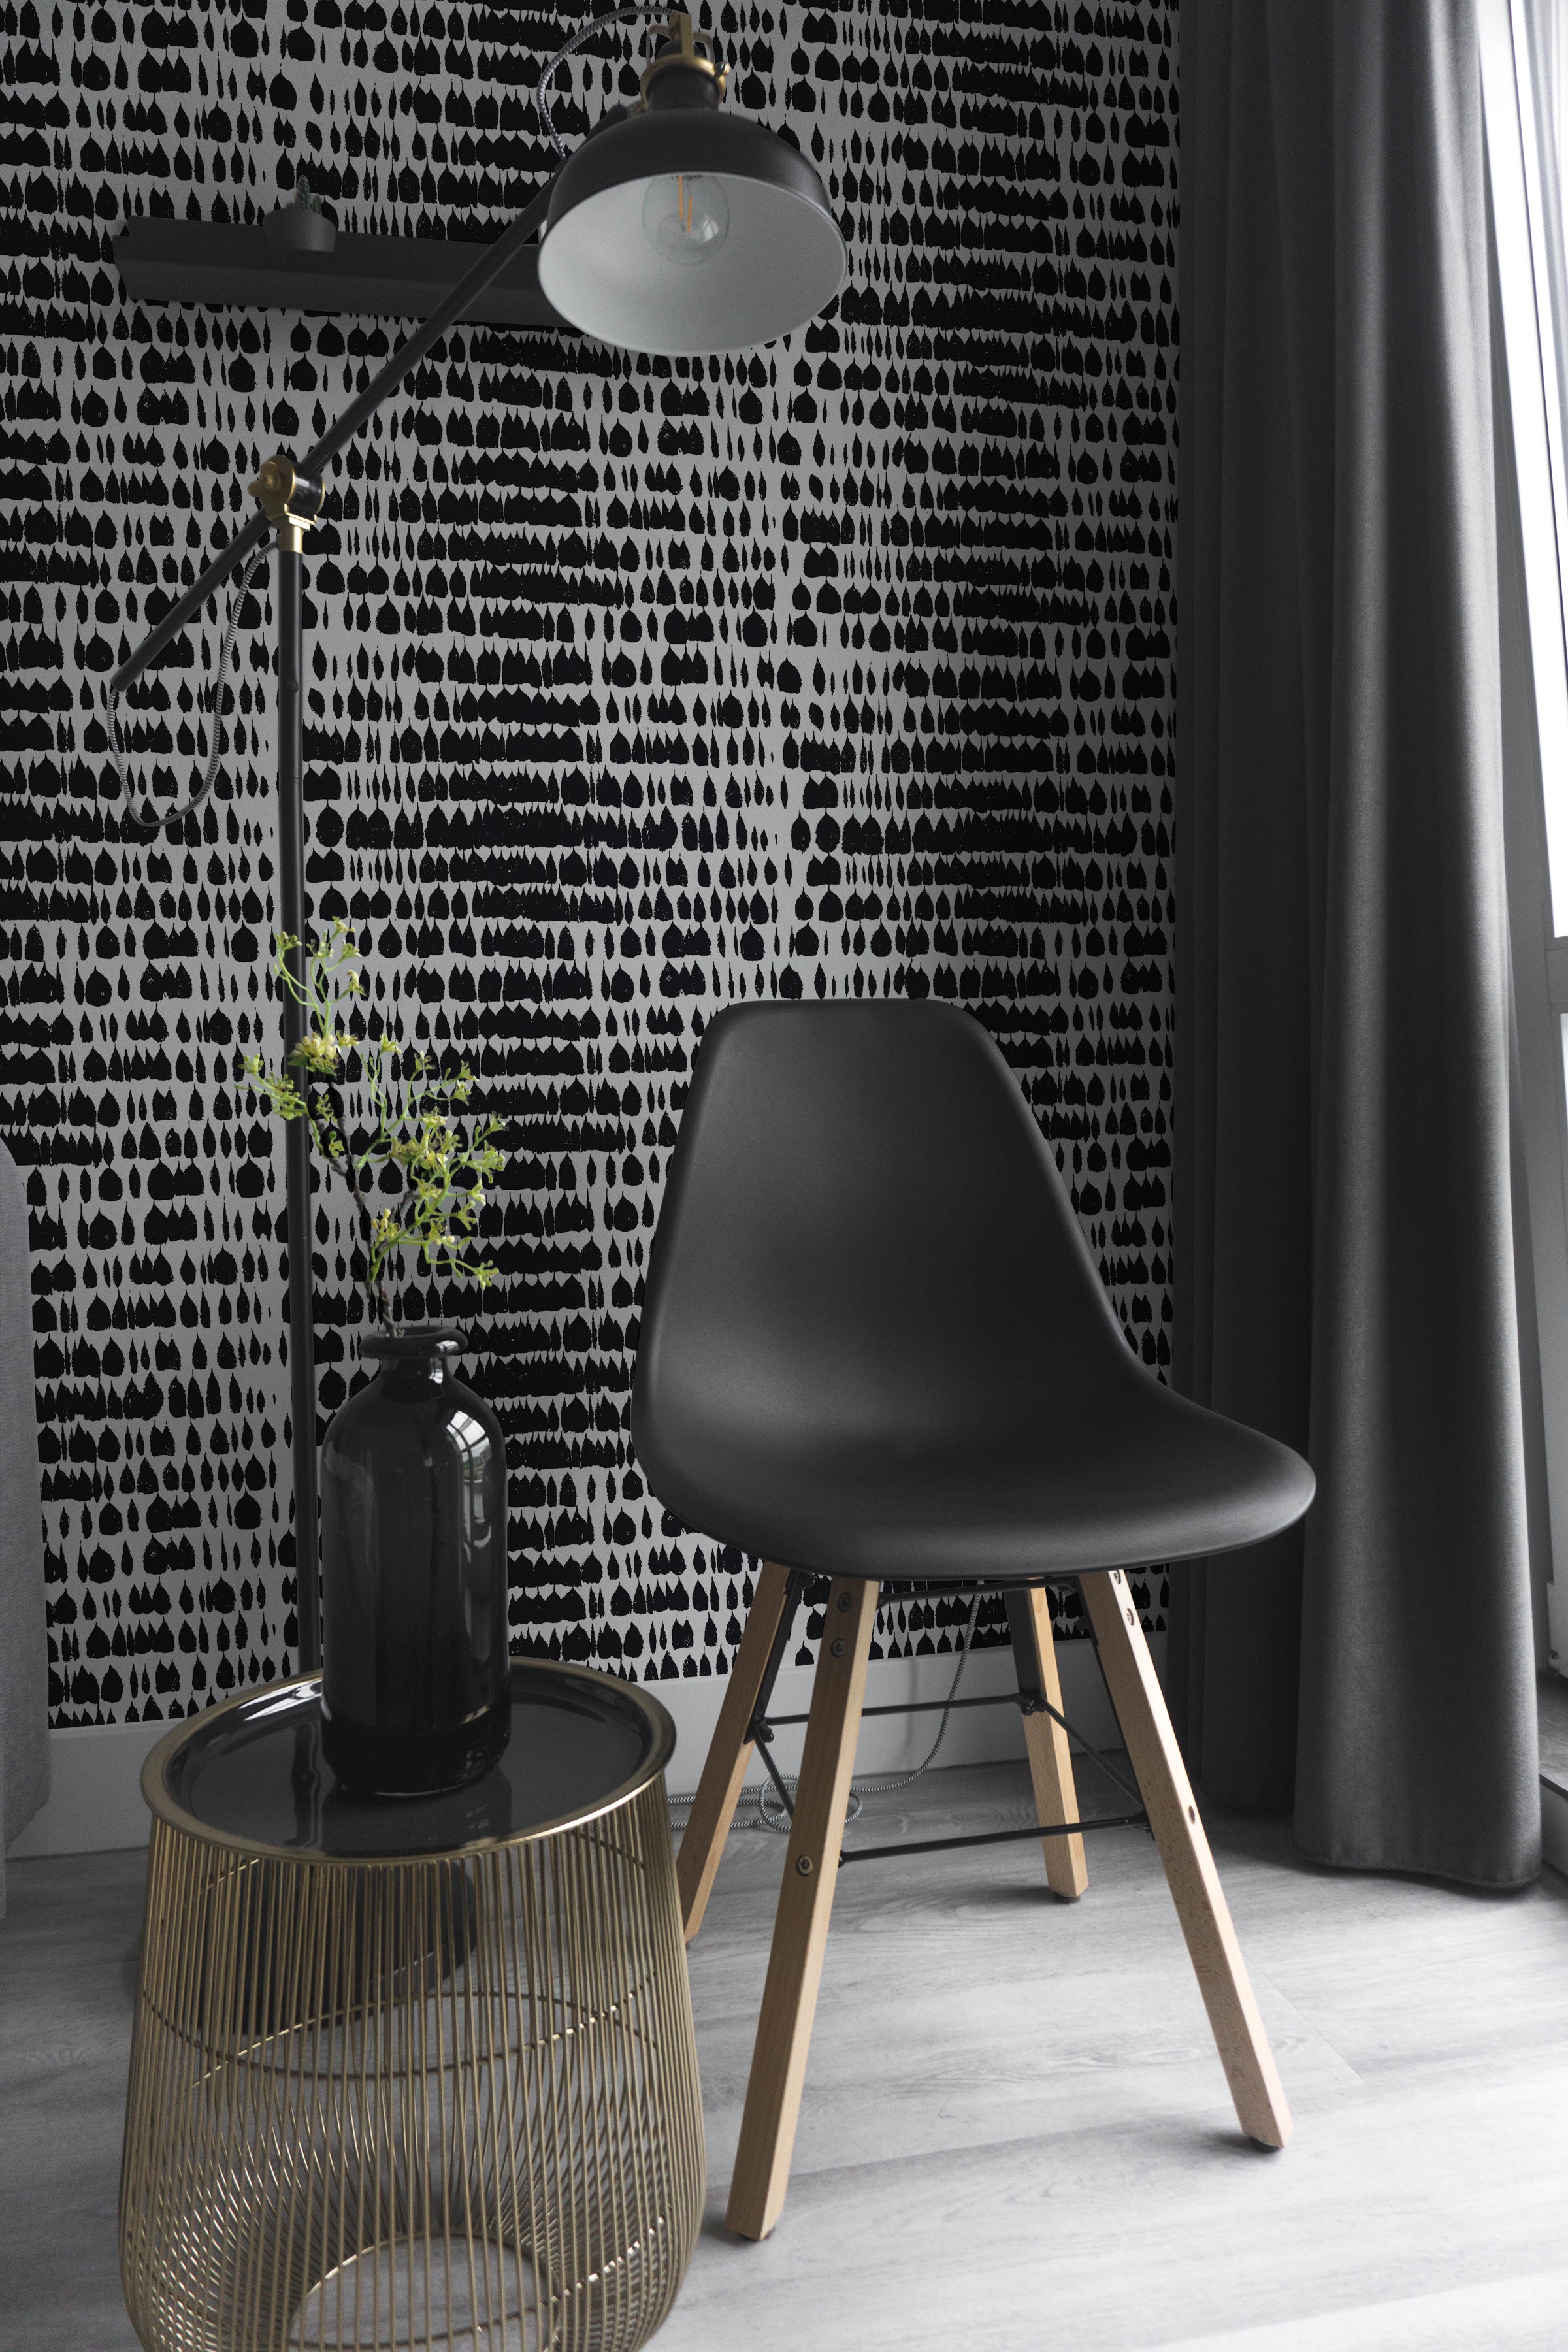 A modern interior featuring the Bold Brilliance Wallpaper with a distinctive black and white pattern that resembles inkblots or abstract brush strokes. The wallpaper creates a dynamic backdrop for a sleek black chair and a stylish floor lamp, accentuating a contemporary, minimalist decor.